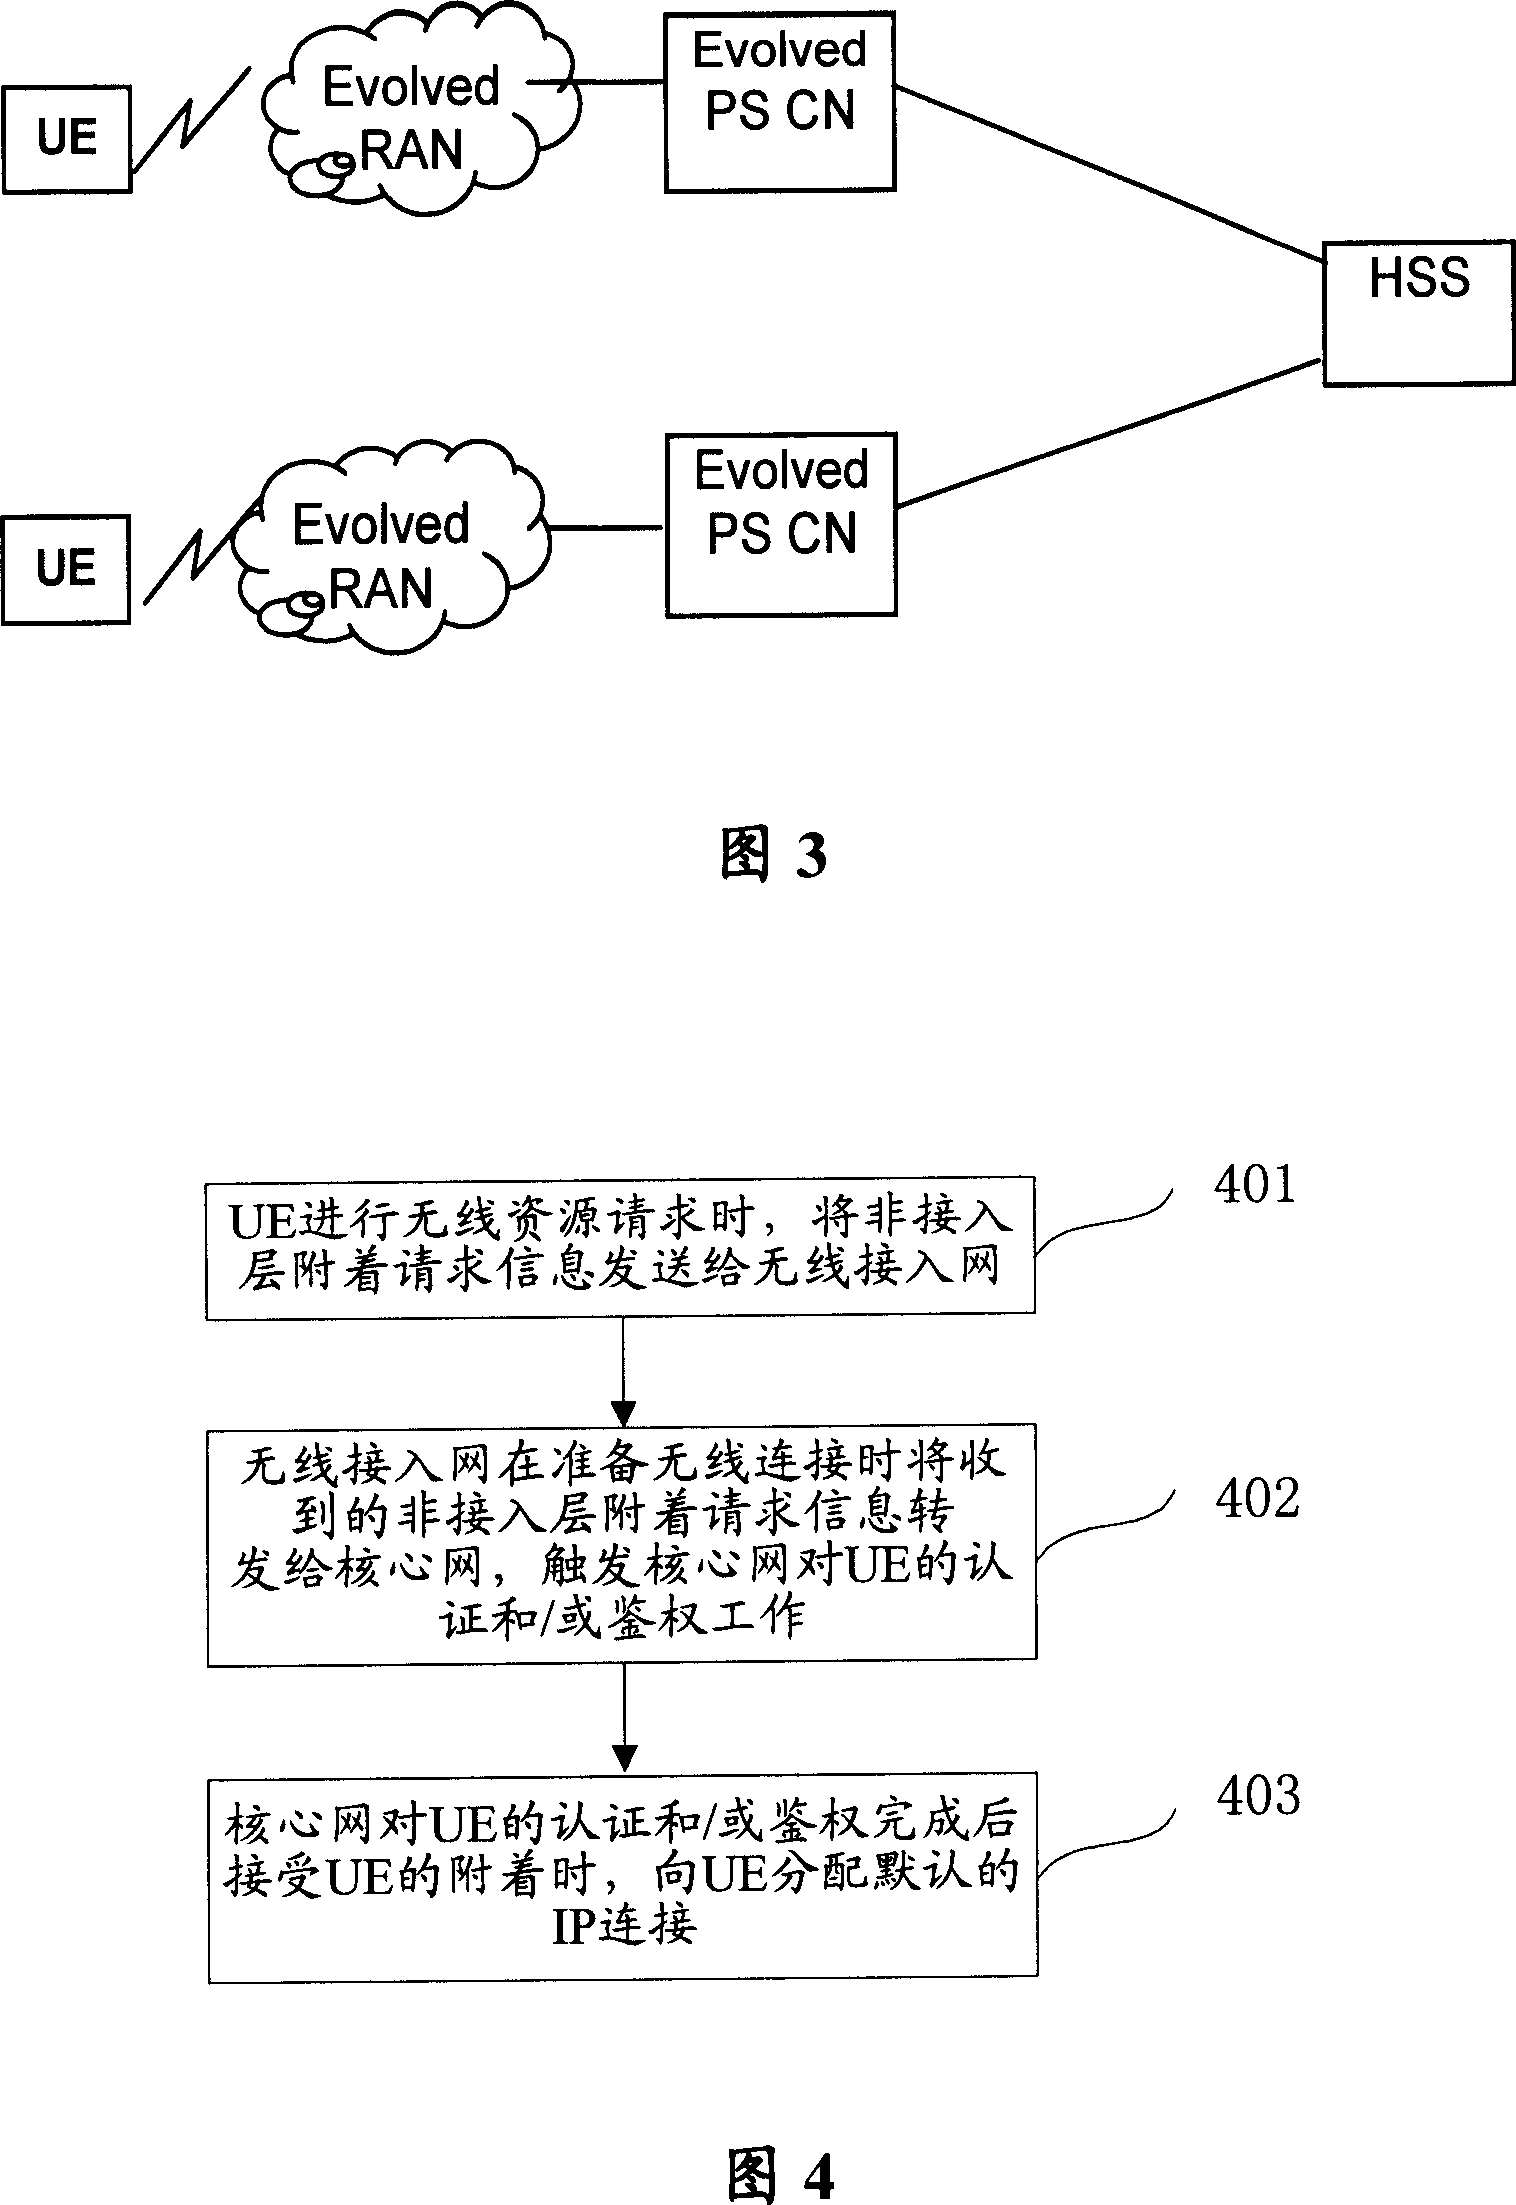 Method for power on and attachment access of the user device in the mobile communication system